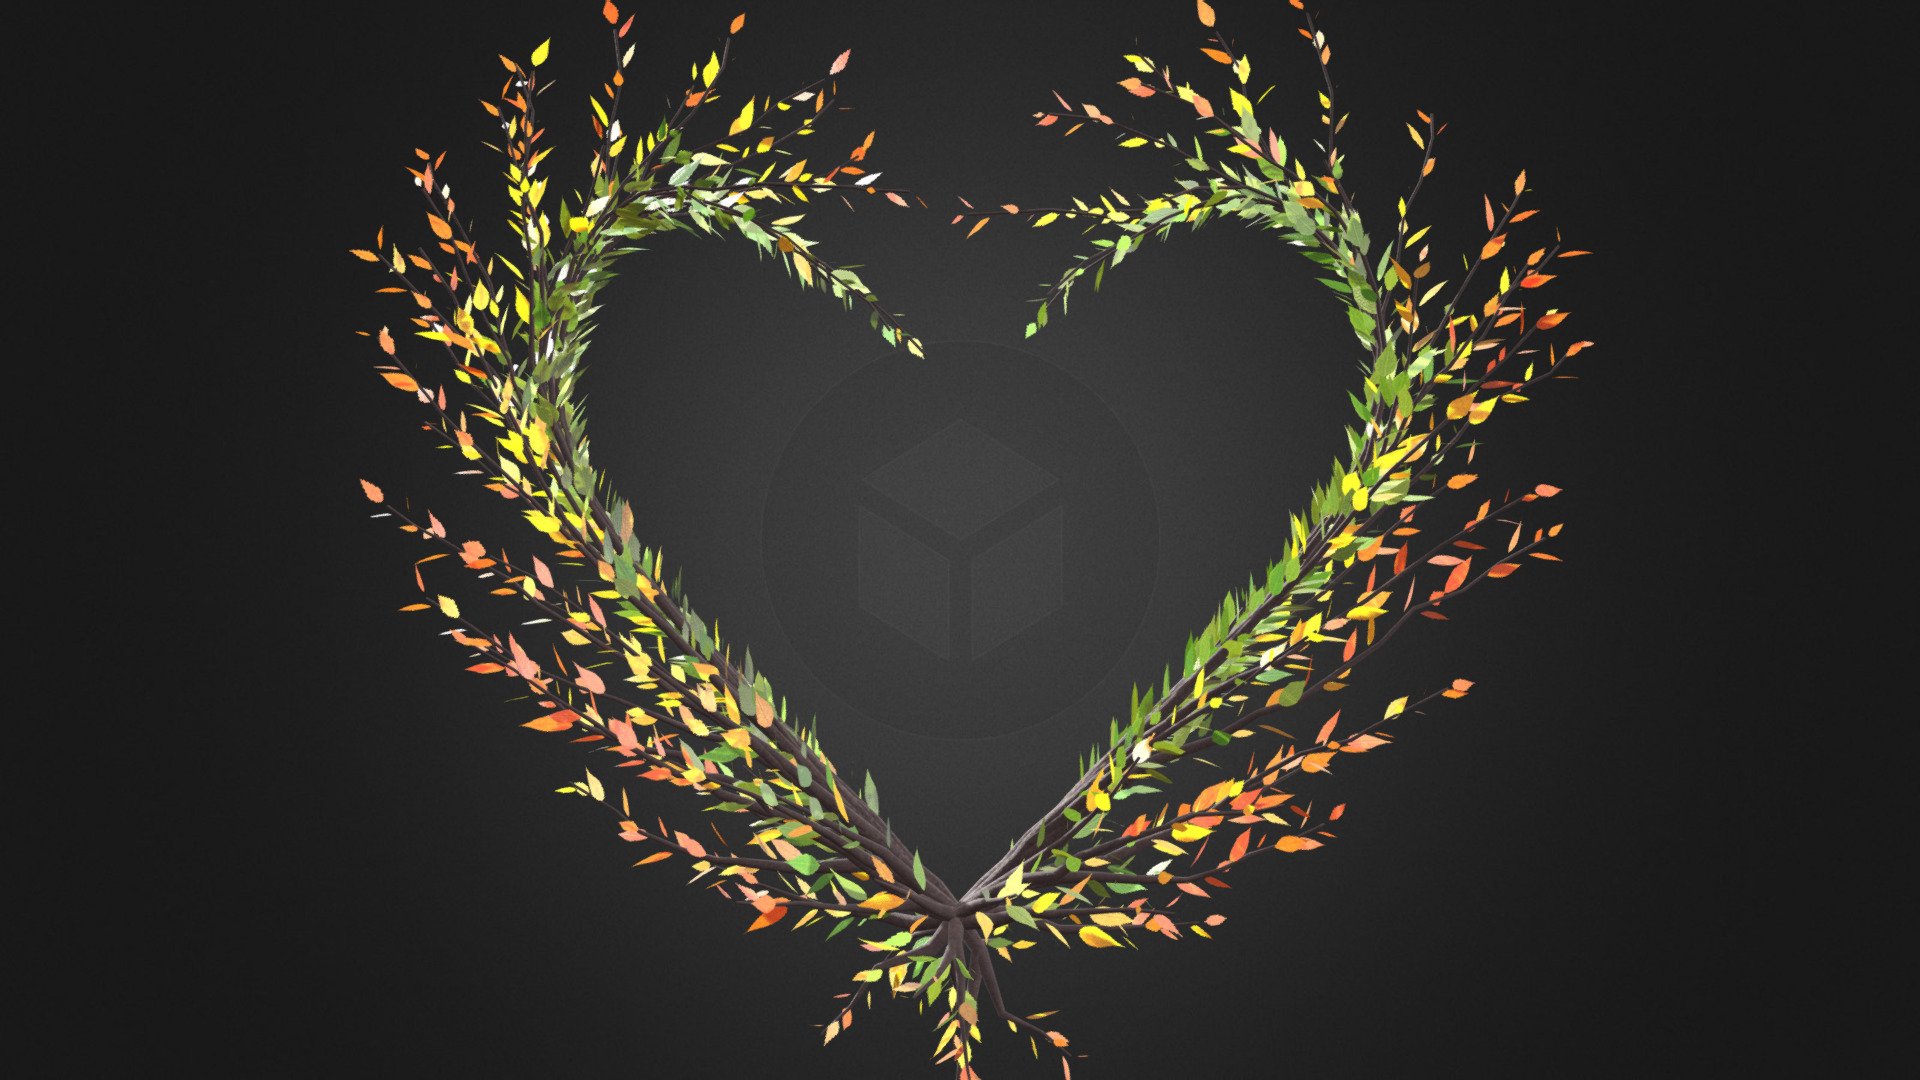 Unrolling growing animation. Heart medical Concept.
Tree shaped as heart with seasonal leaves. Keyframed joints stored as fbx file. Suitable for rendering.
Package also contain animated Alembic Vertex cache and animated usdz file.
FBX version: 2020.3.1, Alembic 1.5. Ogawa, USDZ animated cache, Blender 3.4, Maya 2023 - Growing Tree in a shape of Heart - Buy Royalty Free 3D model by zexell 3d model